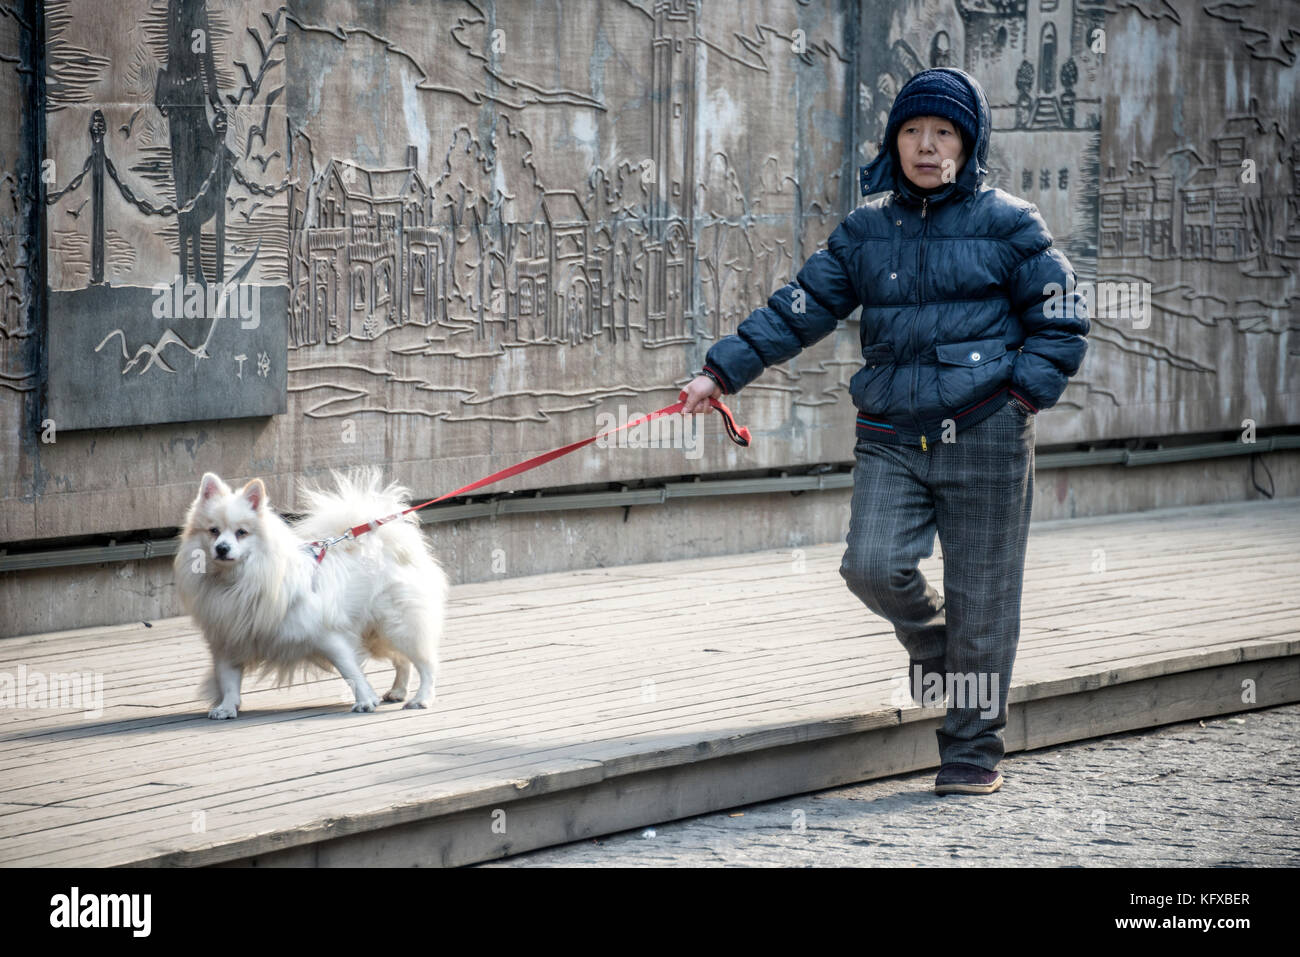 Woman walking with her dog, Shanghai Stock Photo